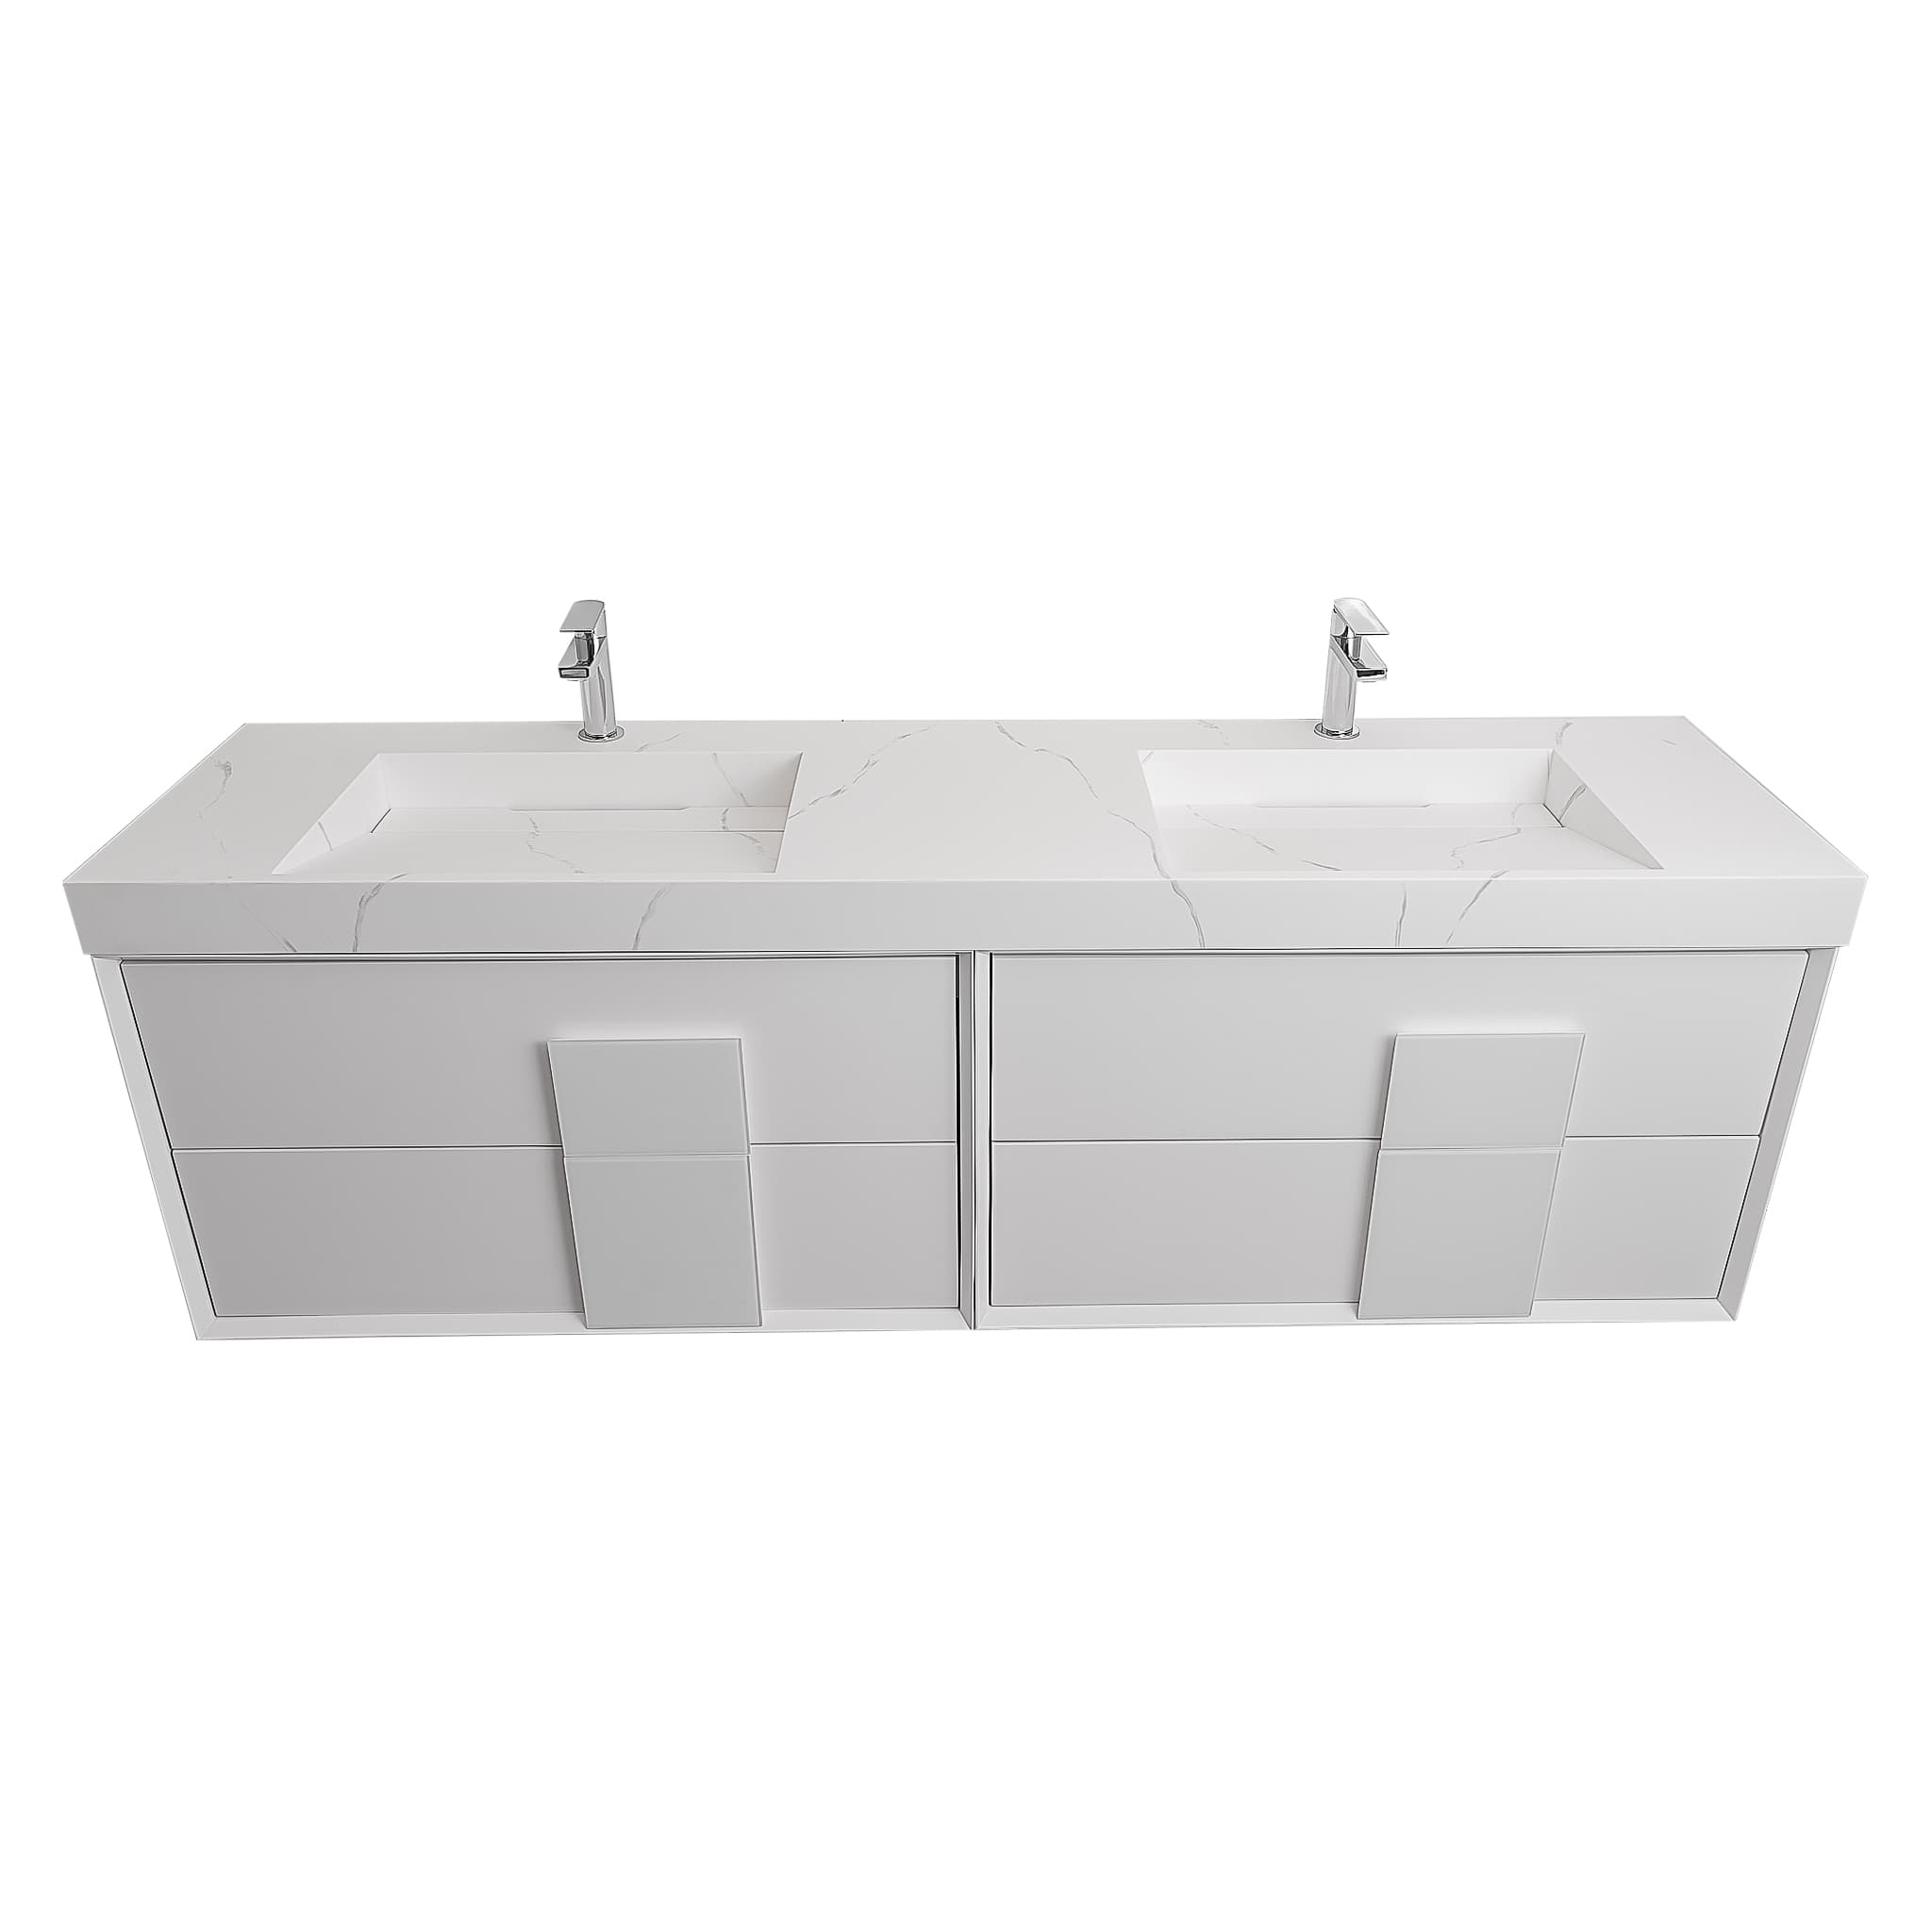 Piazza 63 Matte White With White Handle Cabinet, Solid Surface Matte White Carrara Infinity Double Sink, Wall Mounted Modern Vanity Set